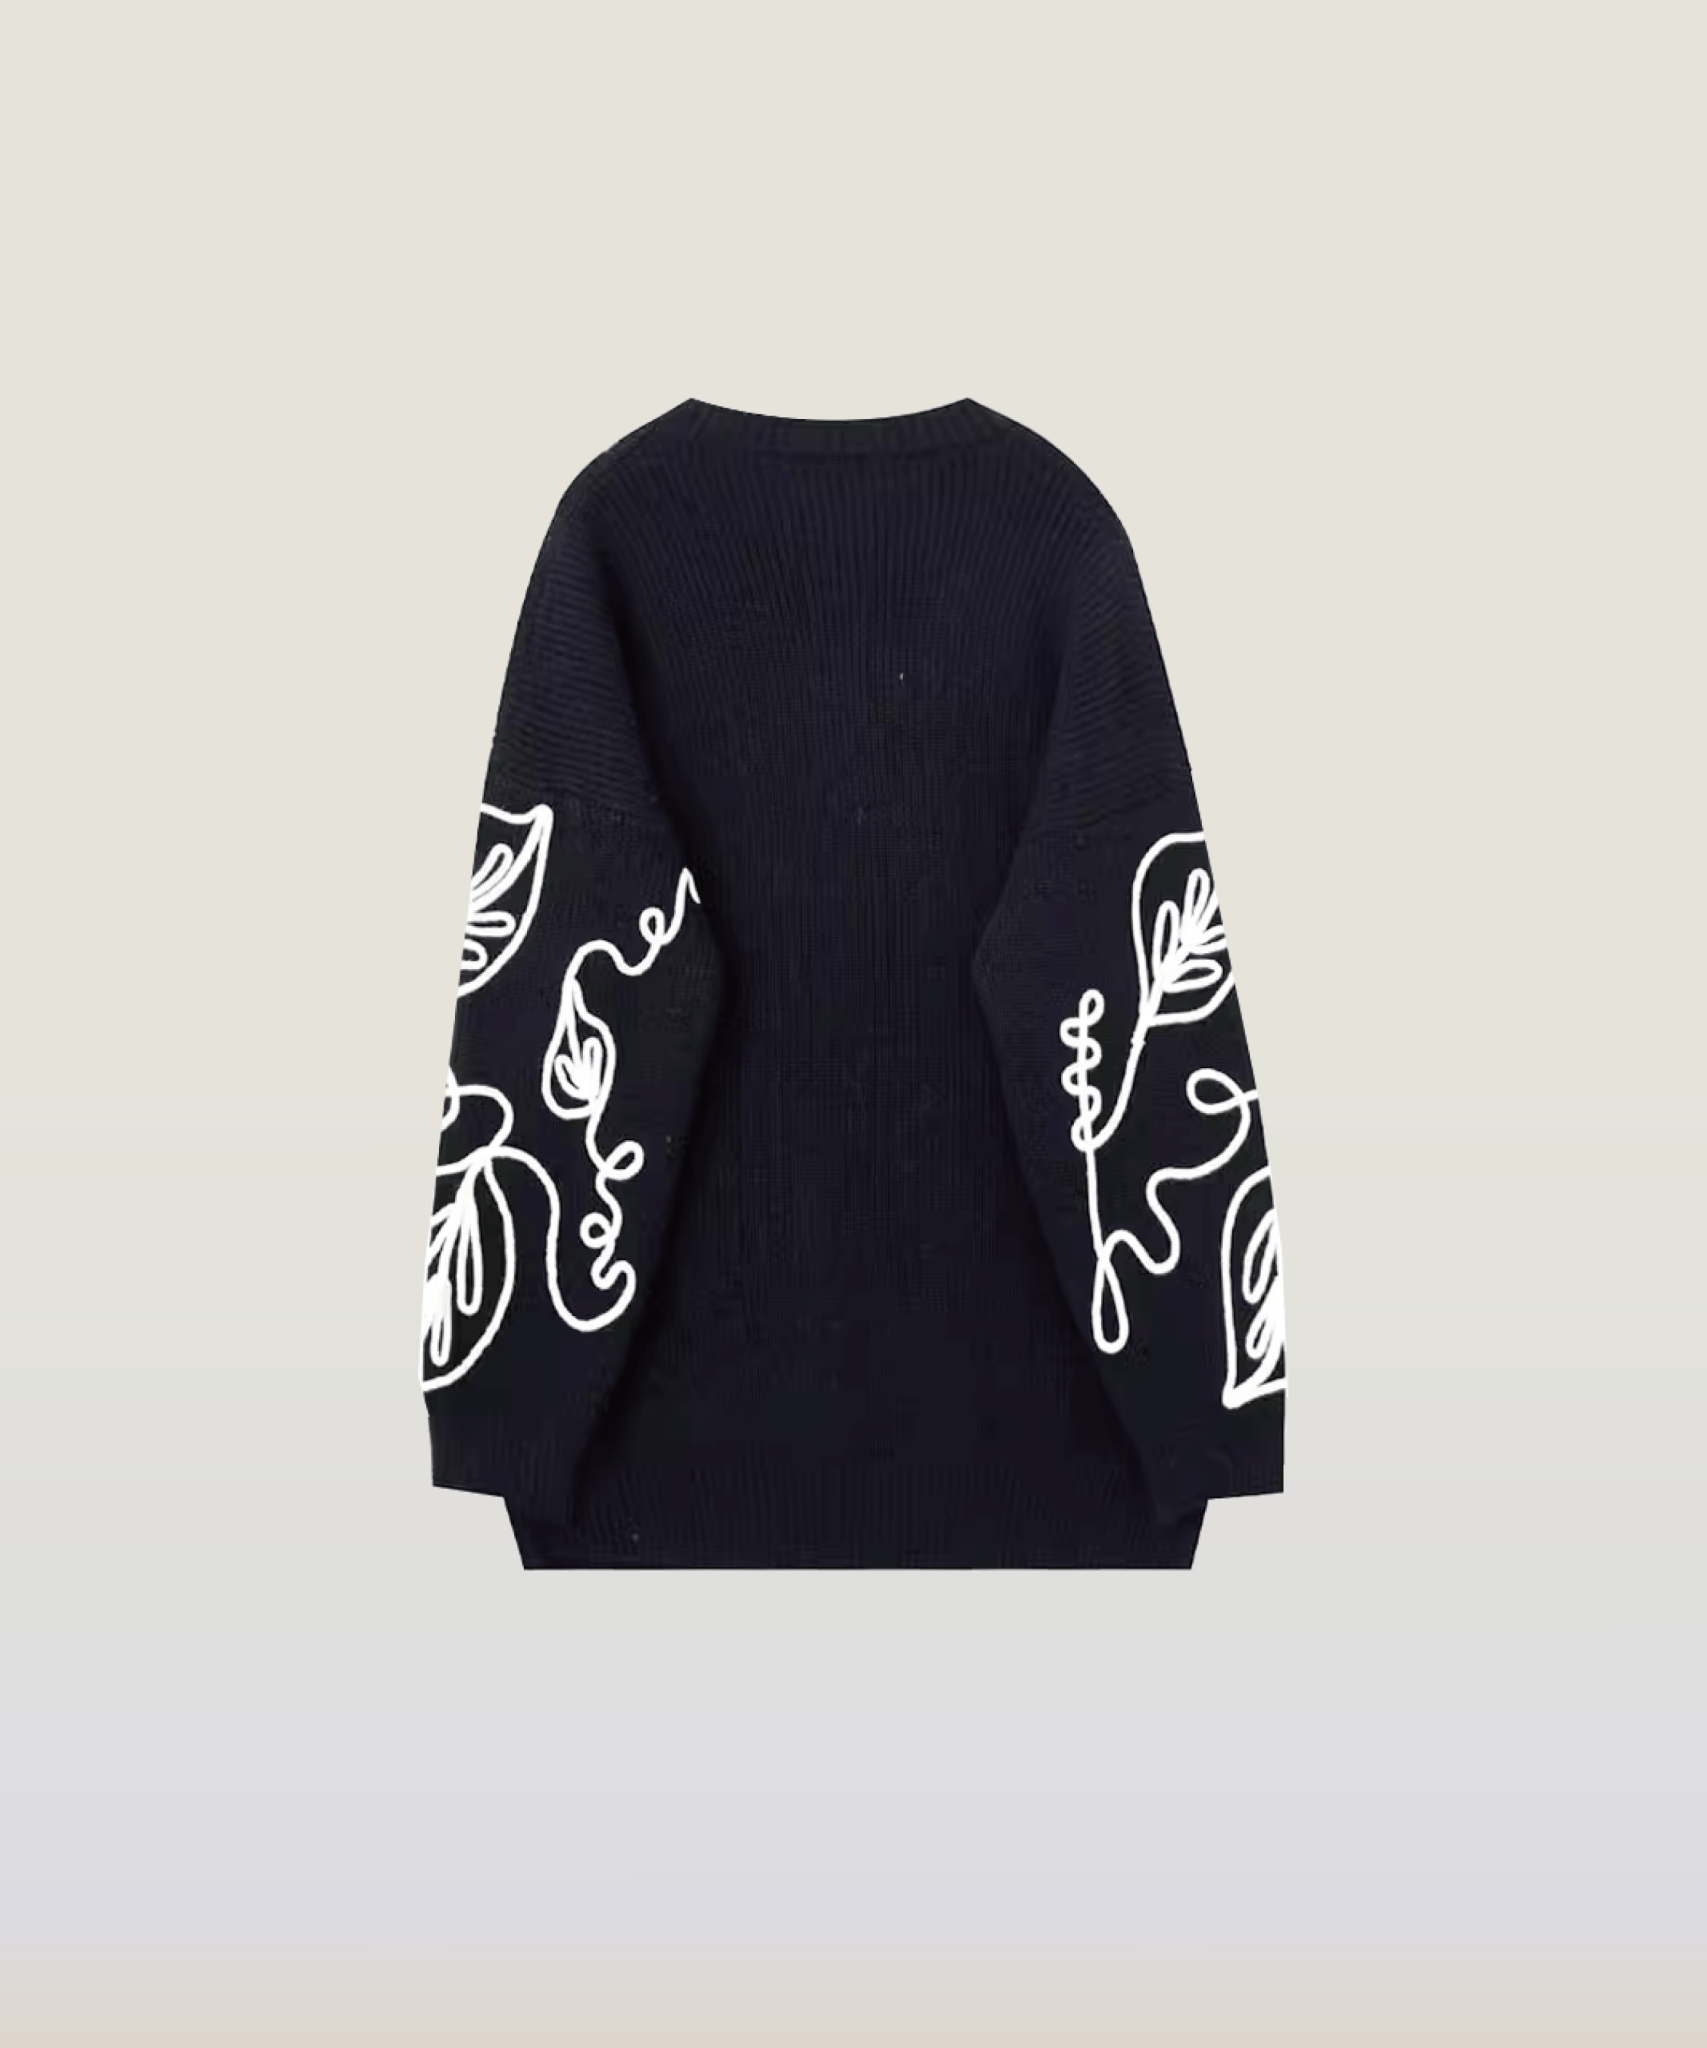 Botanical Embroidered Sweater - LOVE POMME POMME